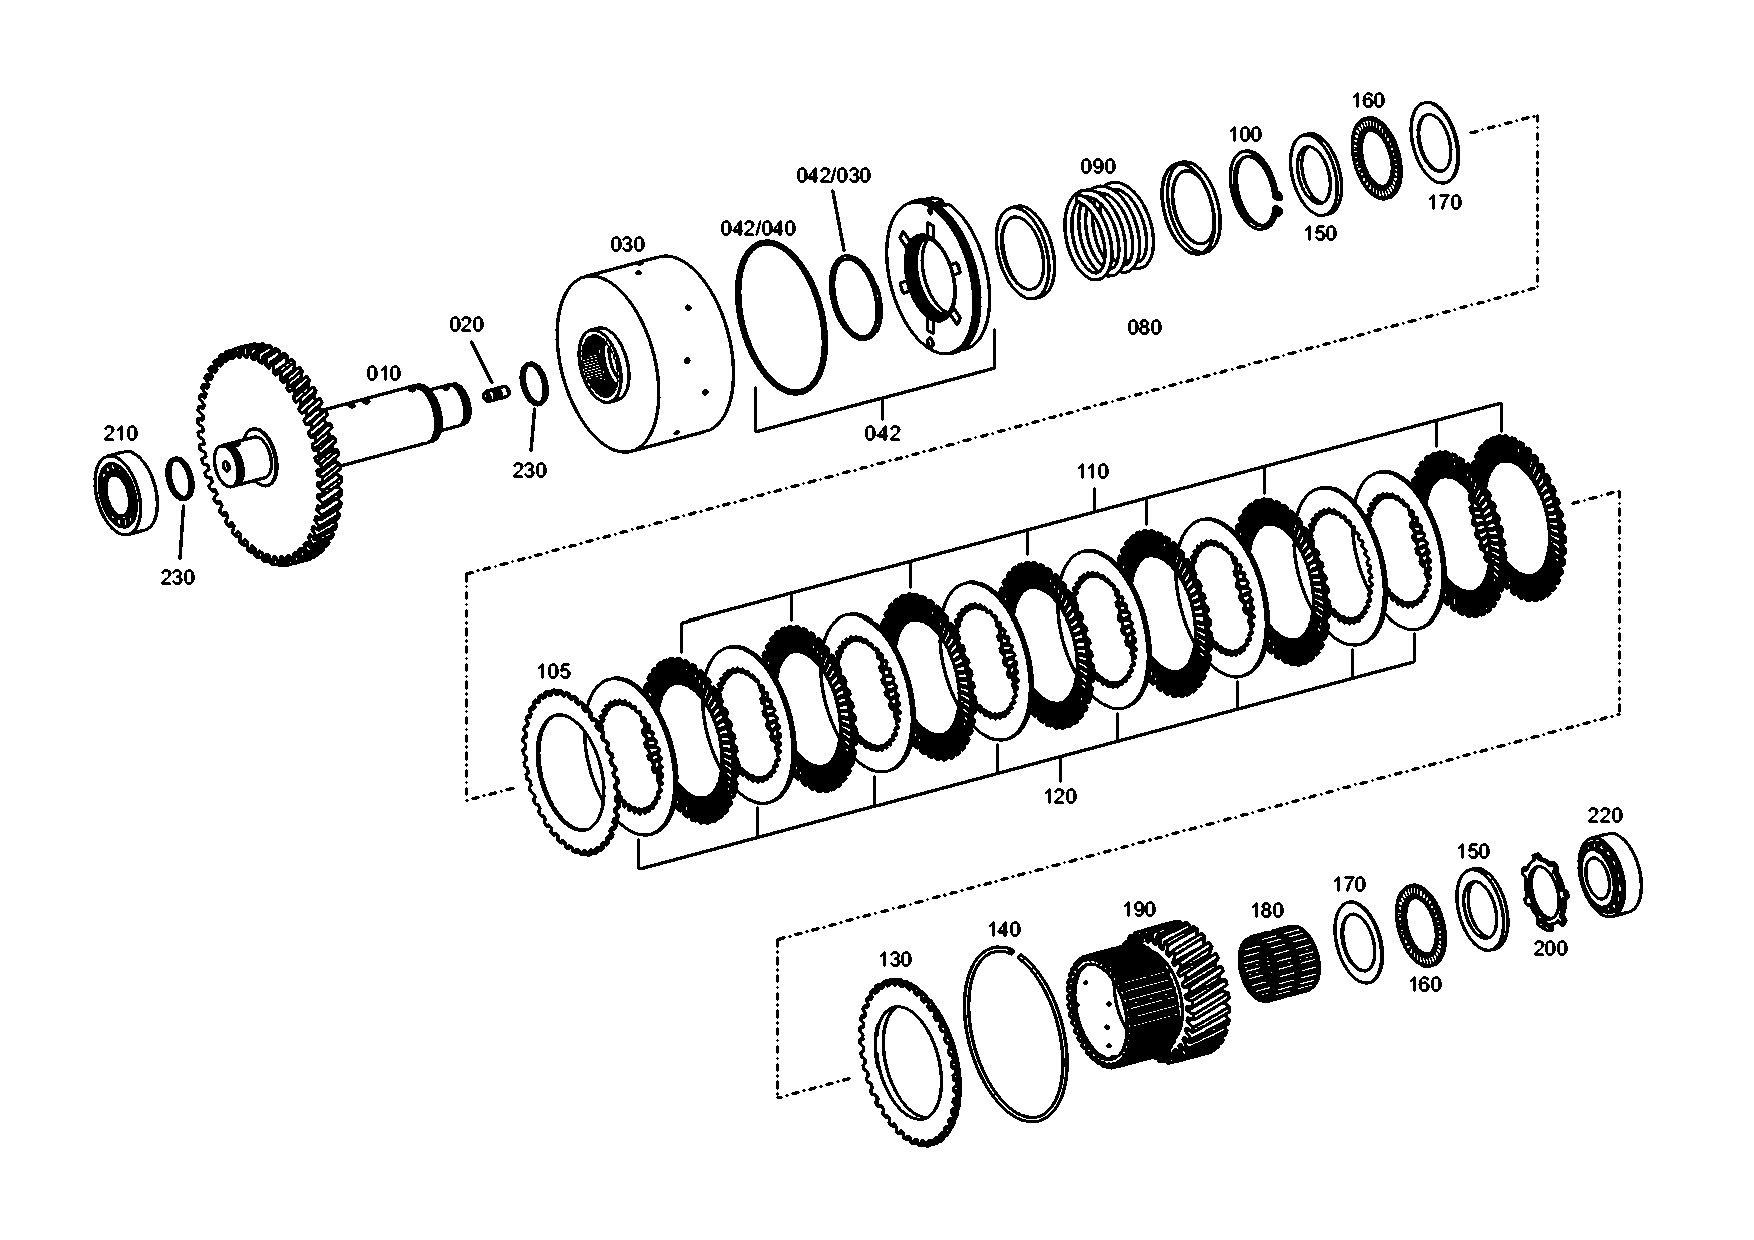 drawing for PPM 6089130 - OUTER CLUTCH DISK (figure 4)